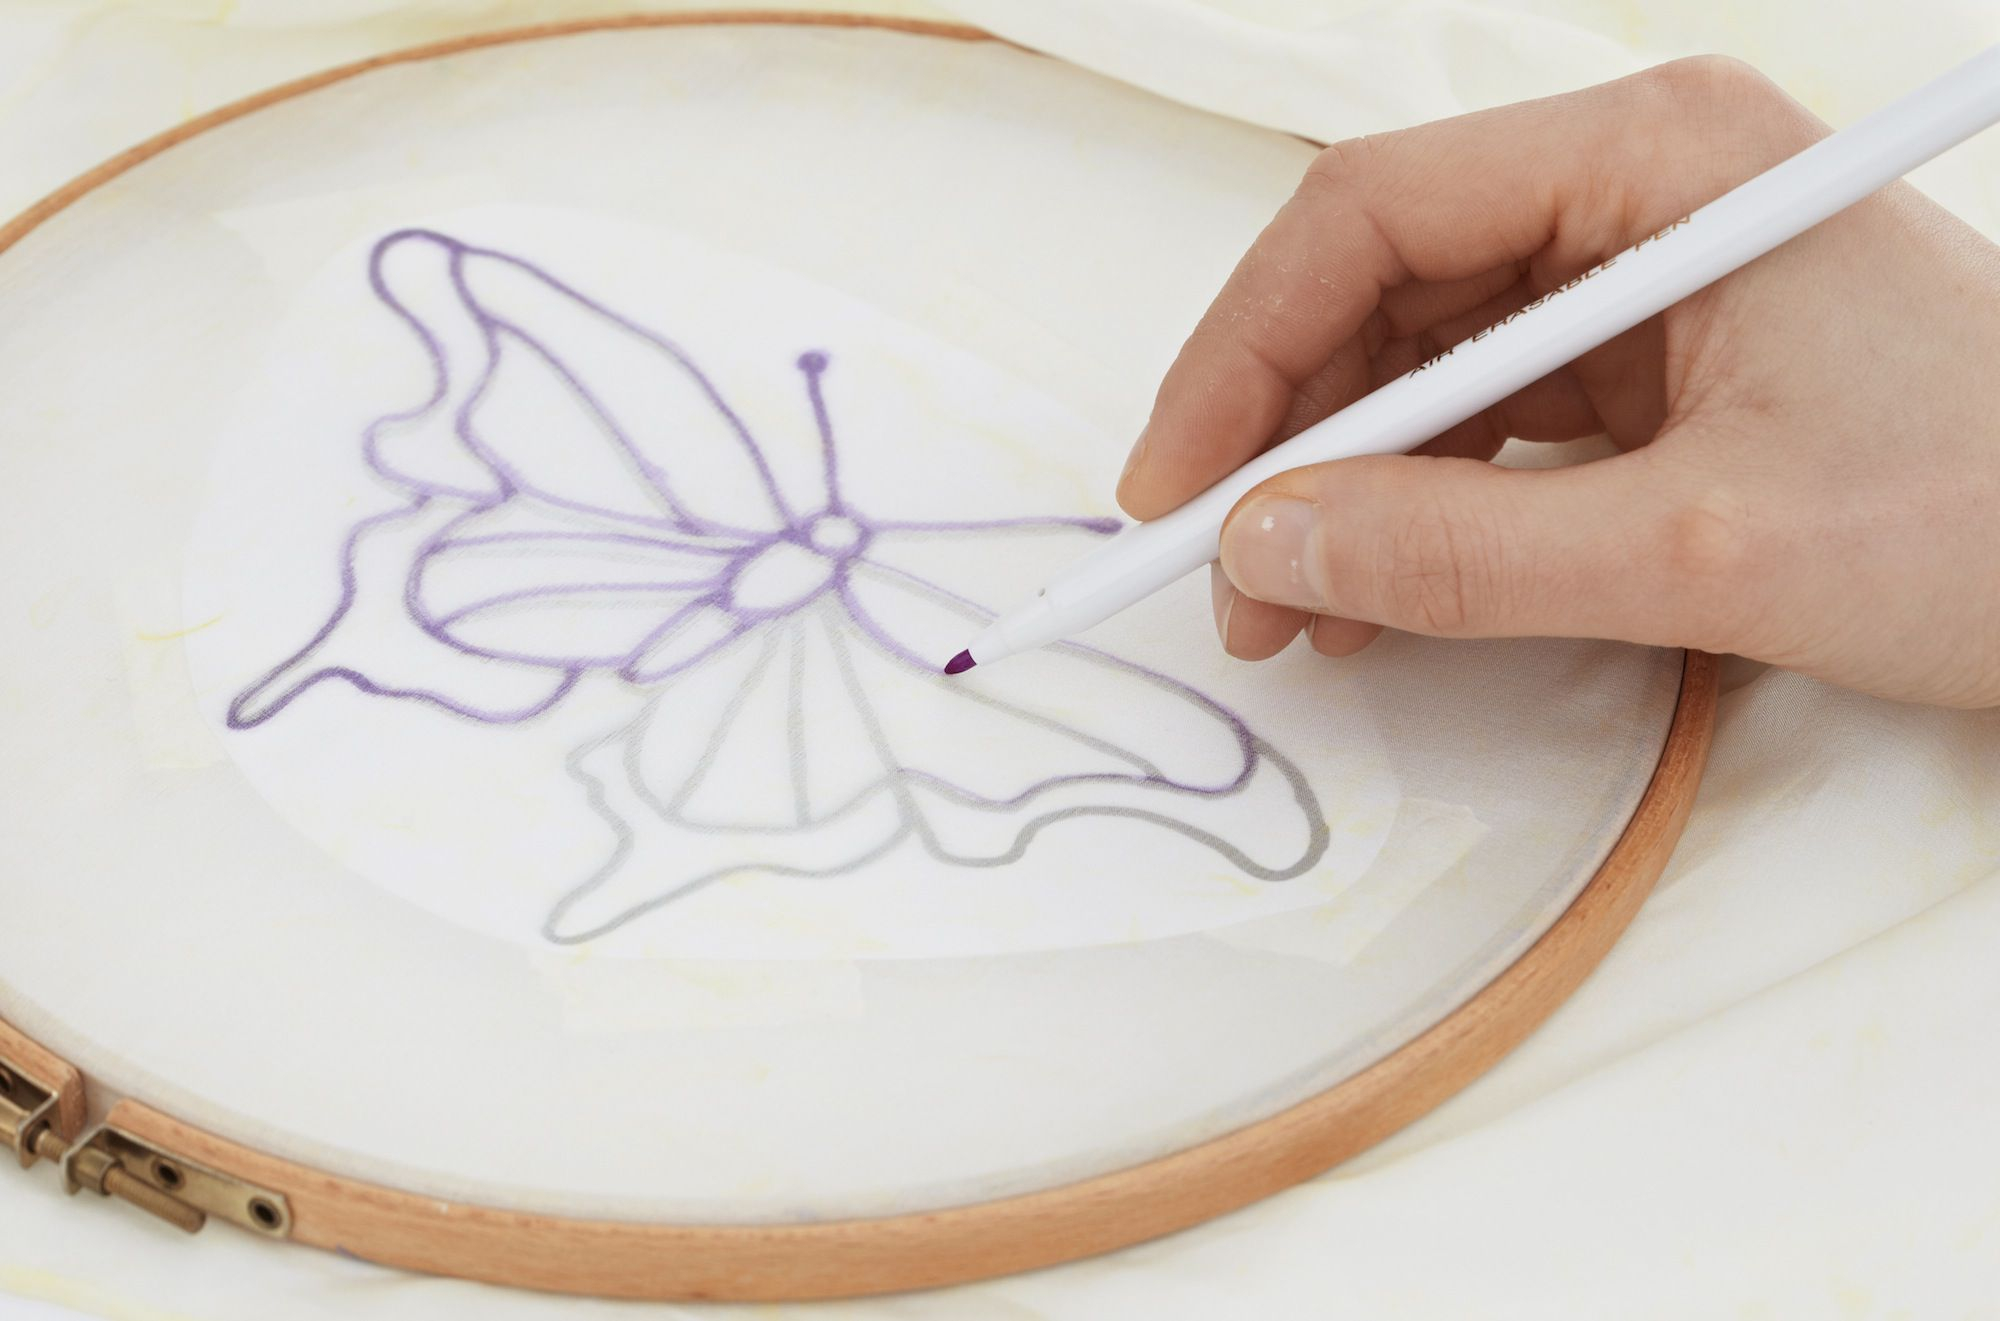 Transfer Embroidery Pattern 7 Methods For Marking Or Transferring Embroidery Patterns